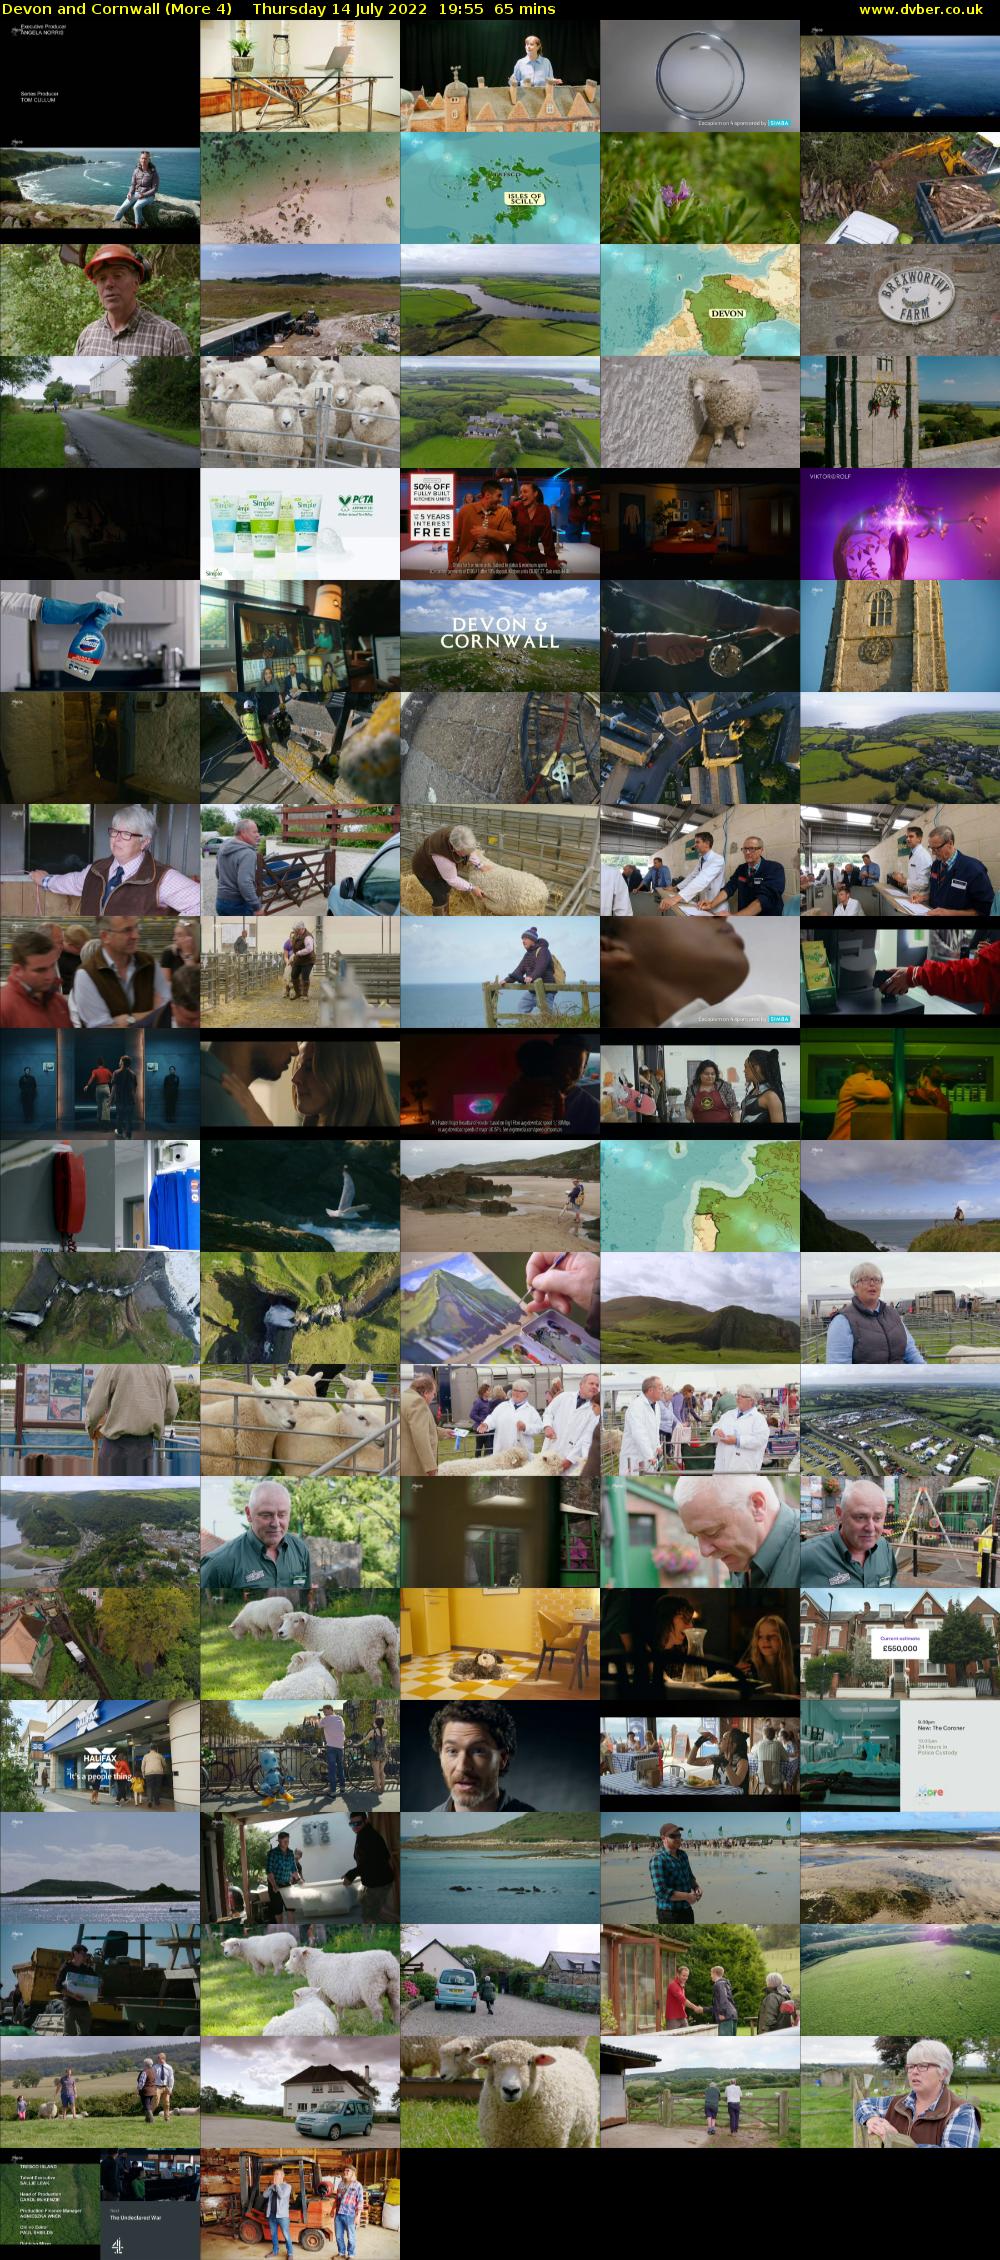 Devon and Cornwall (More 4) Thursday 14 July 2022 19:55 - 21:00